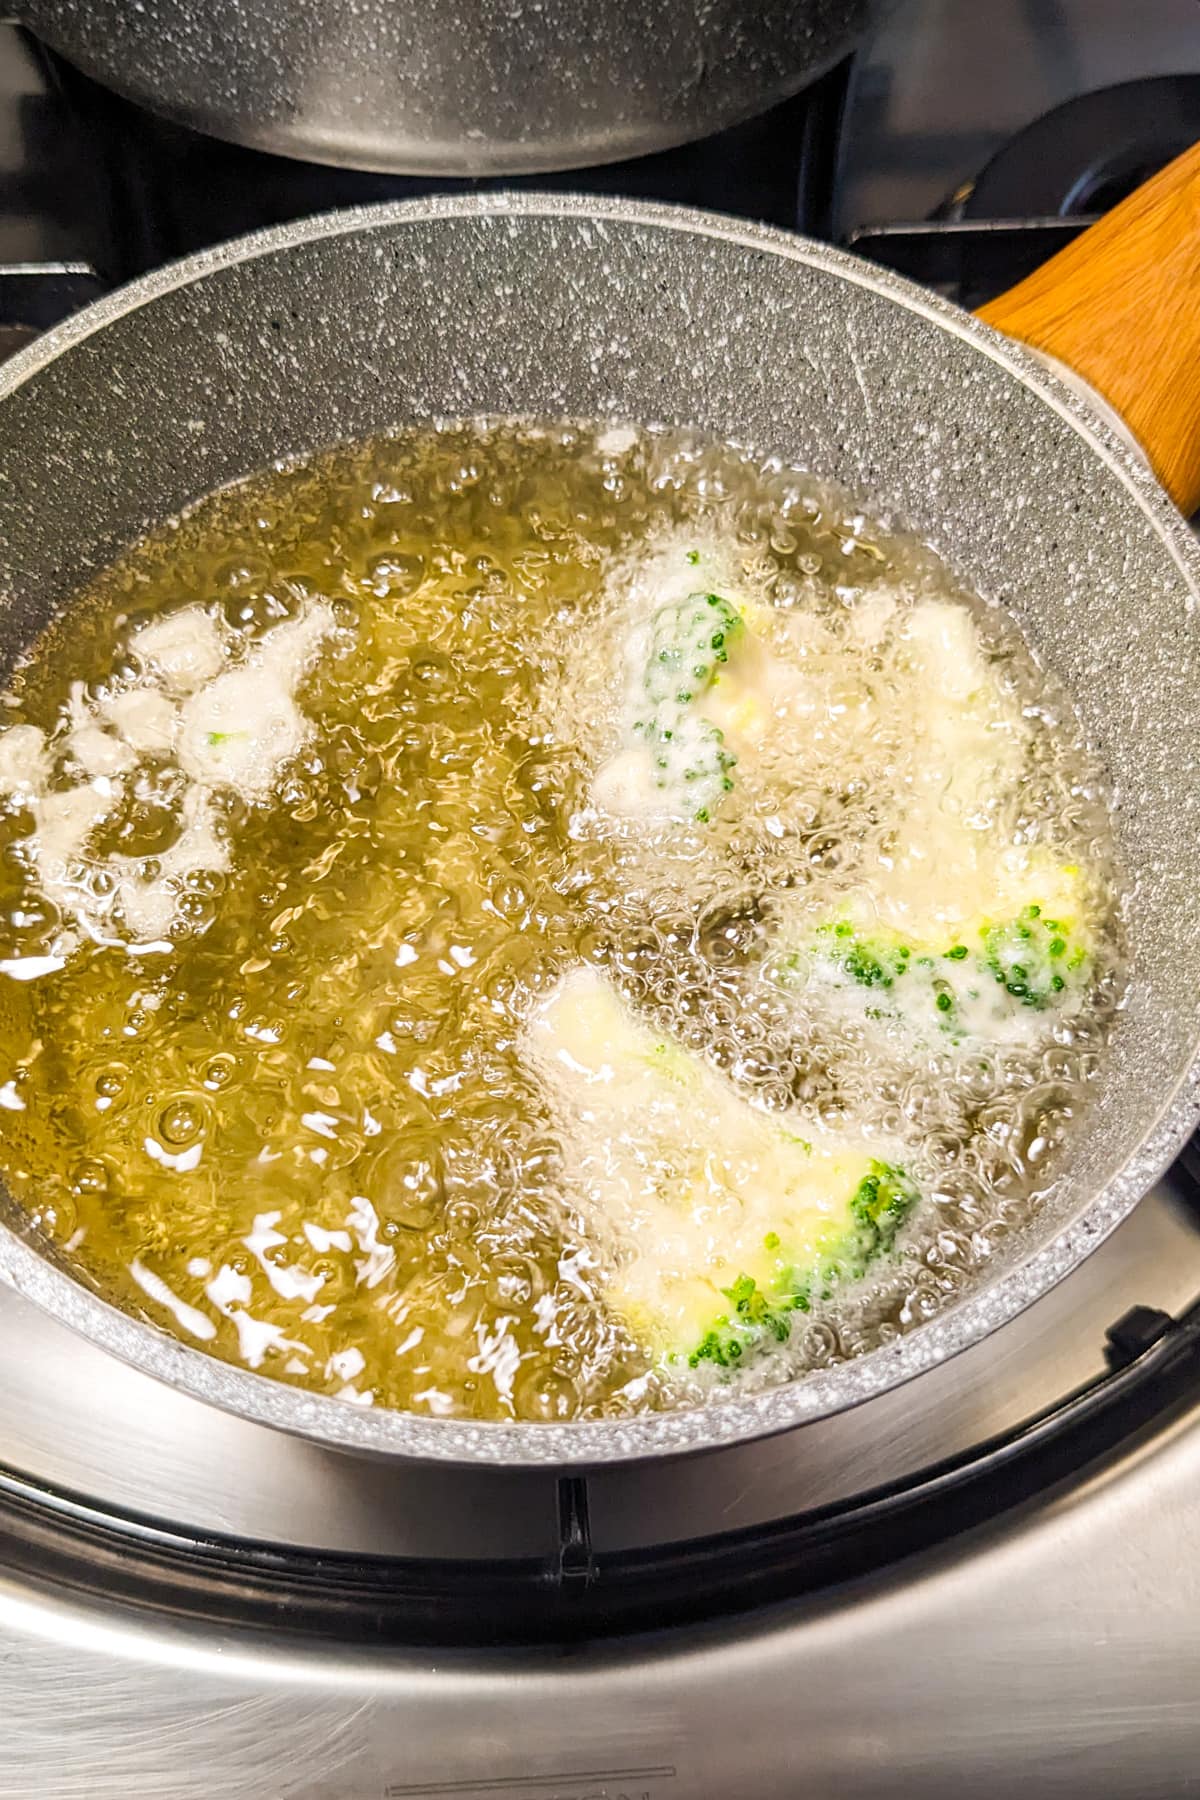 Frying broccoli florets in hot oil.